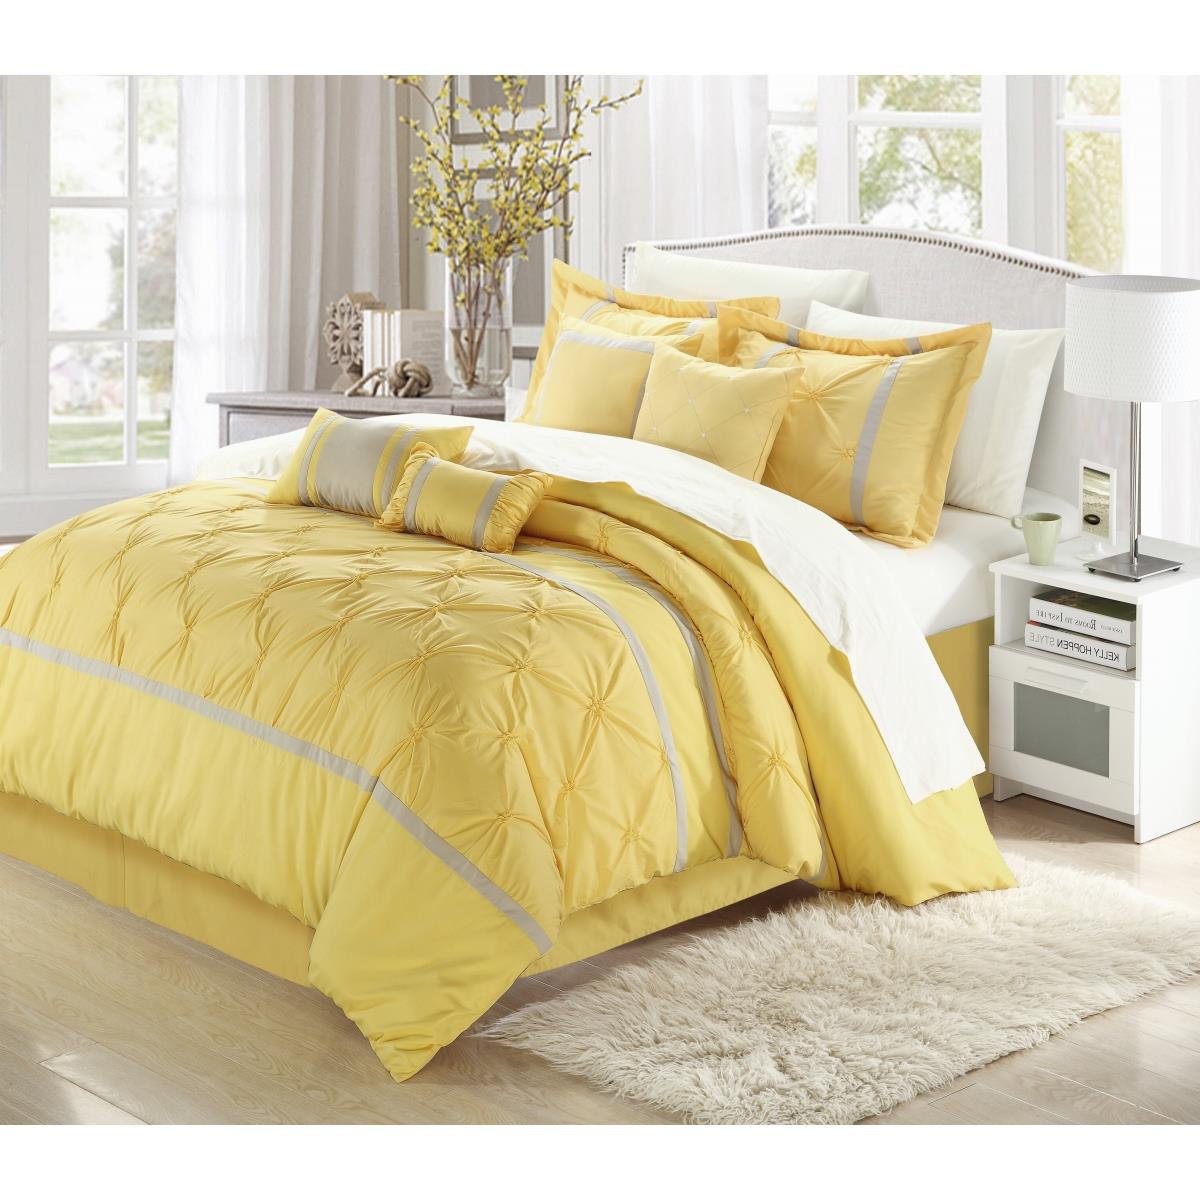 127-160-k-11-us Vermont Yellow & Grey King 12 Piece Bed In A Bag Comforter Set With 4 Piece Sheet Set